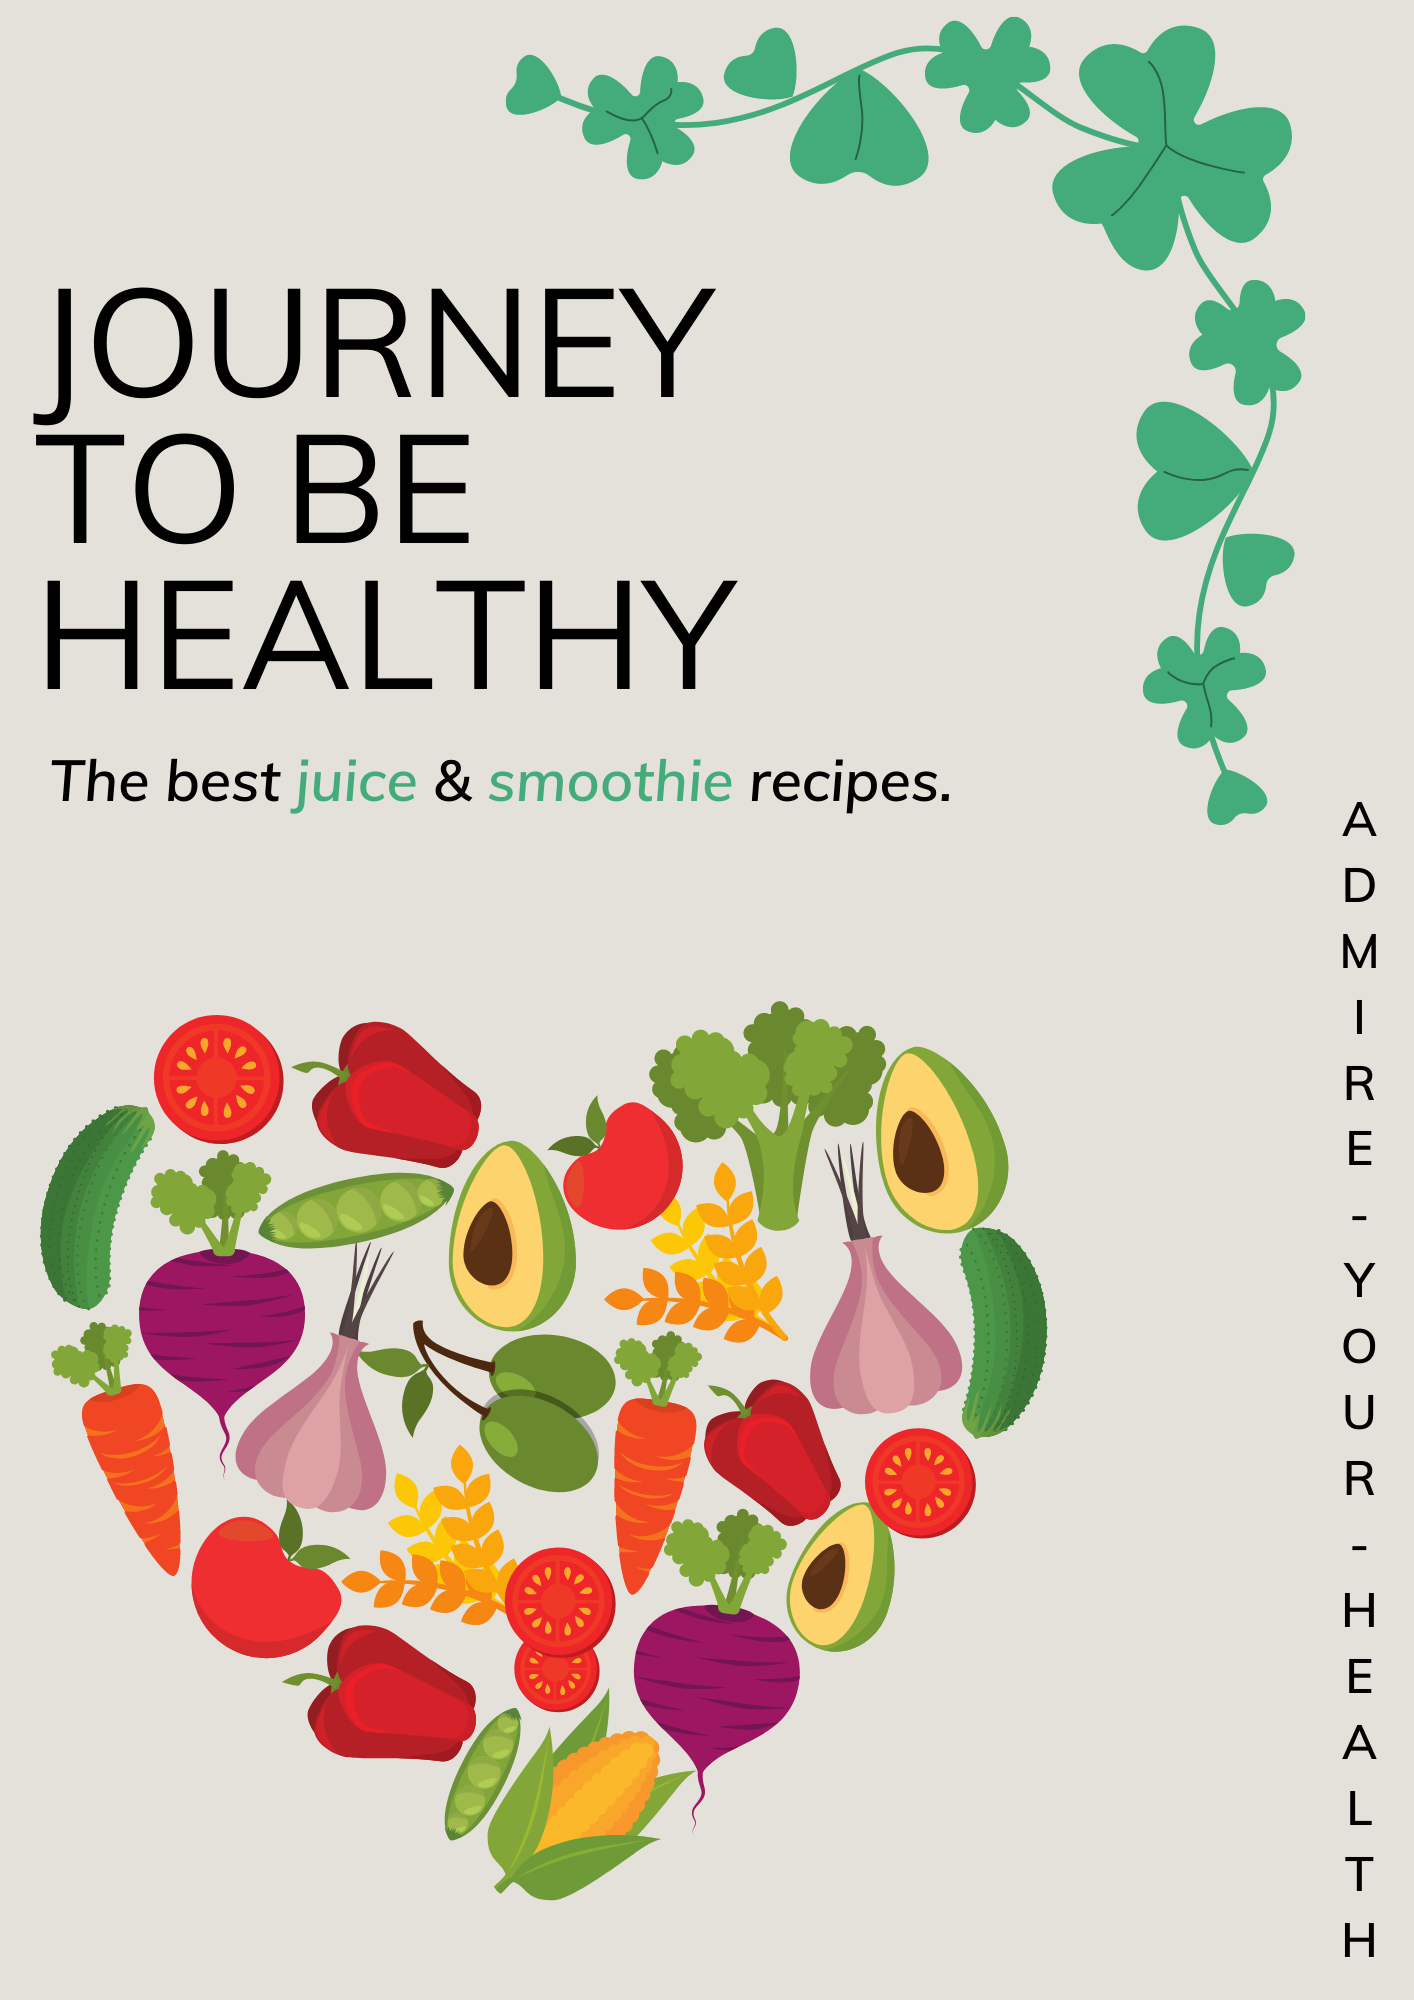 Journey to be healthy